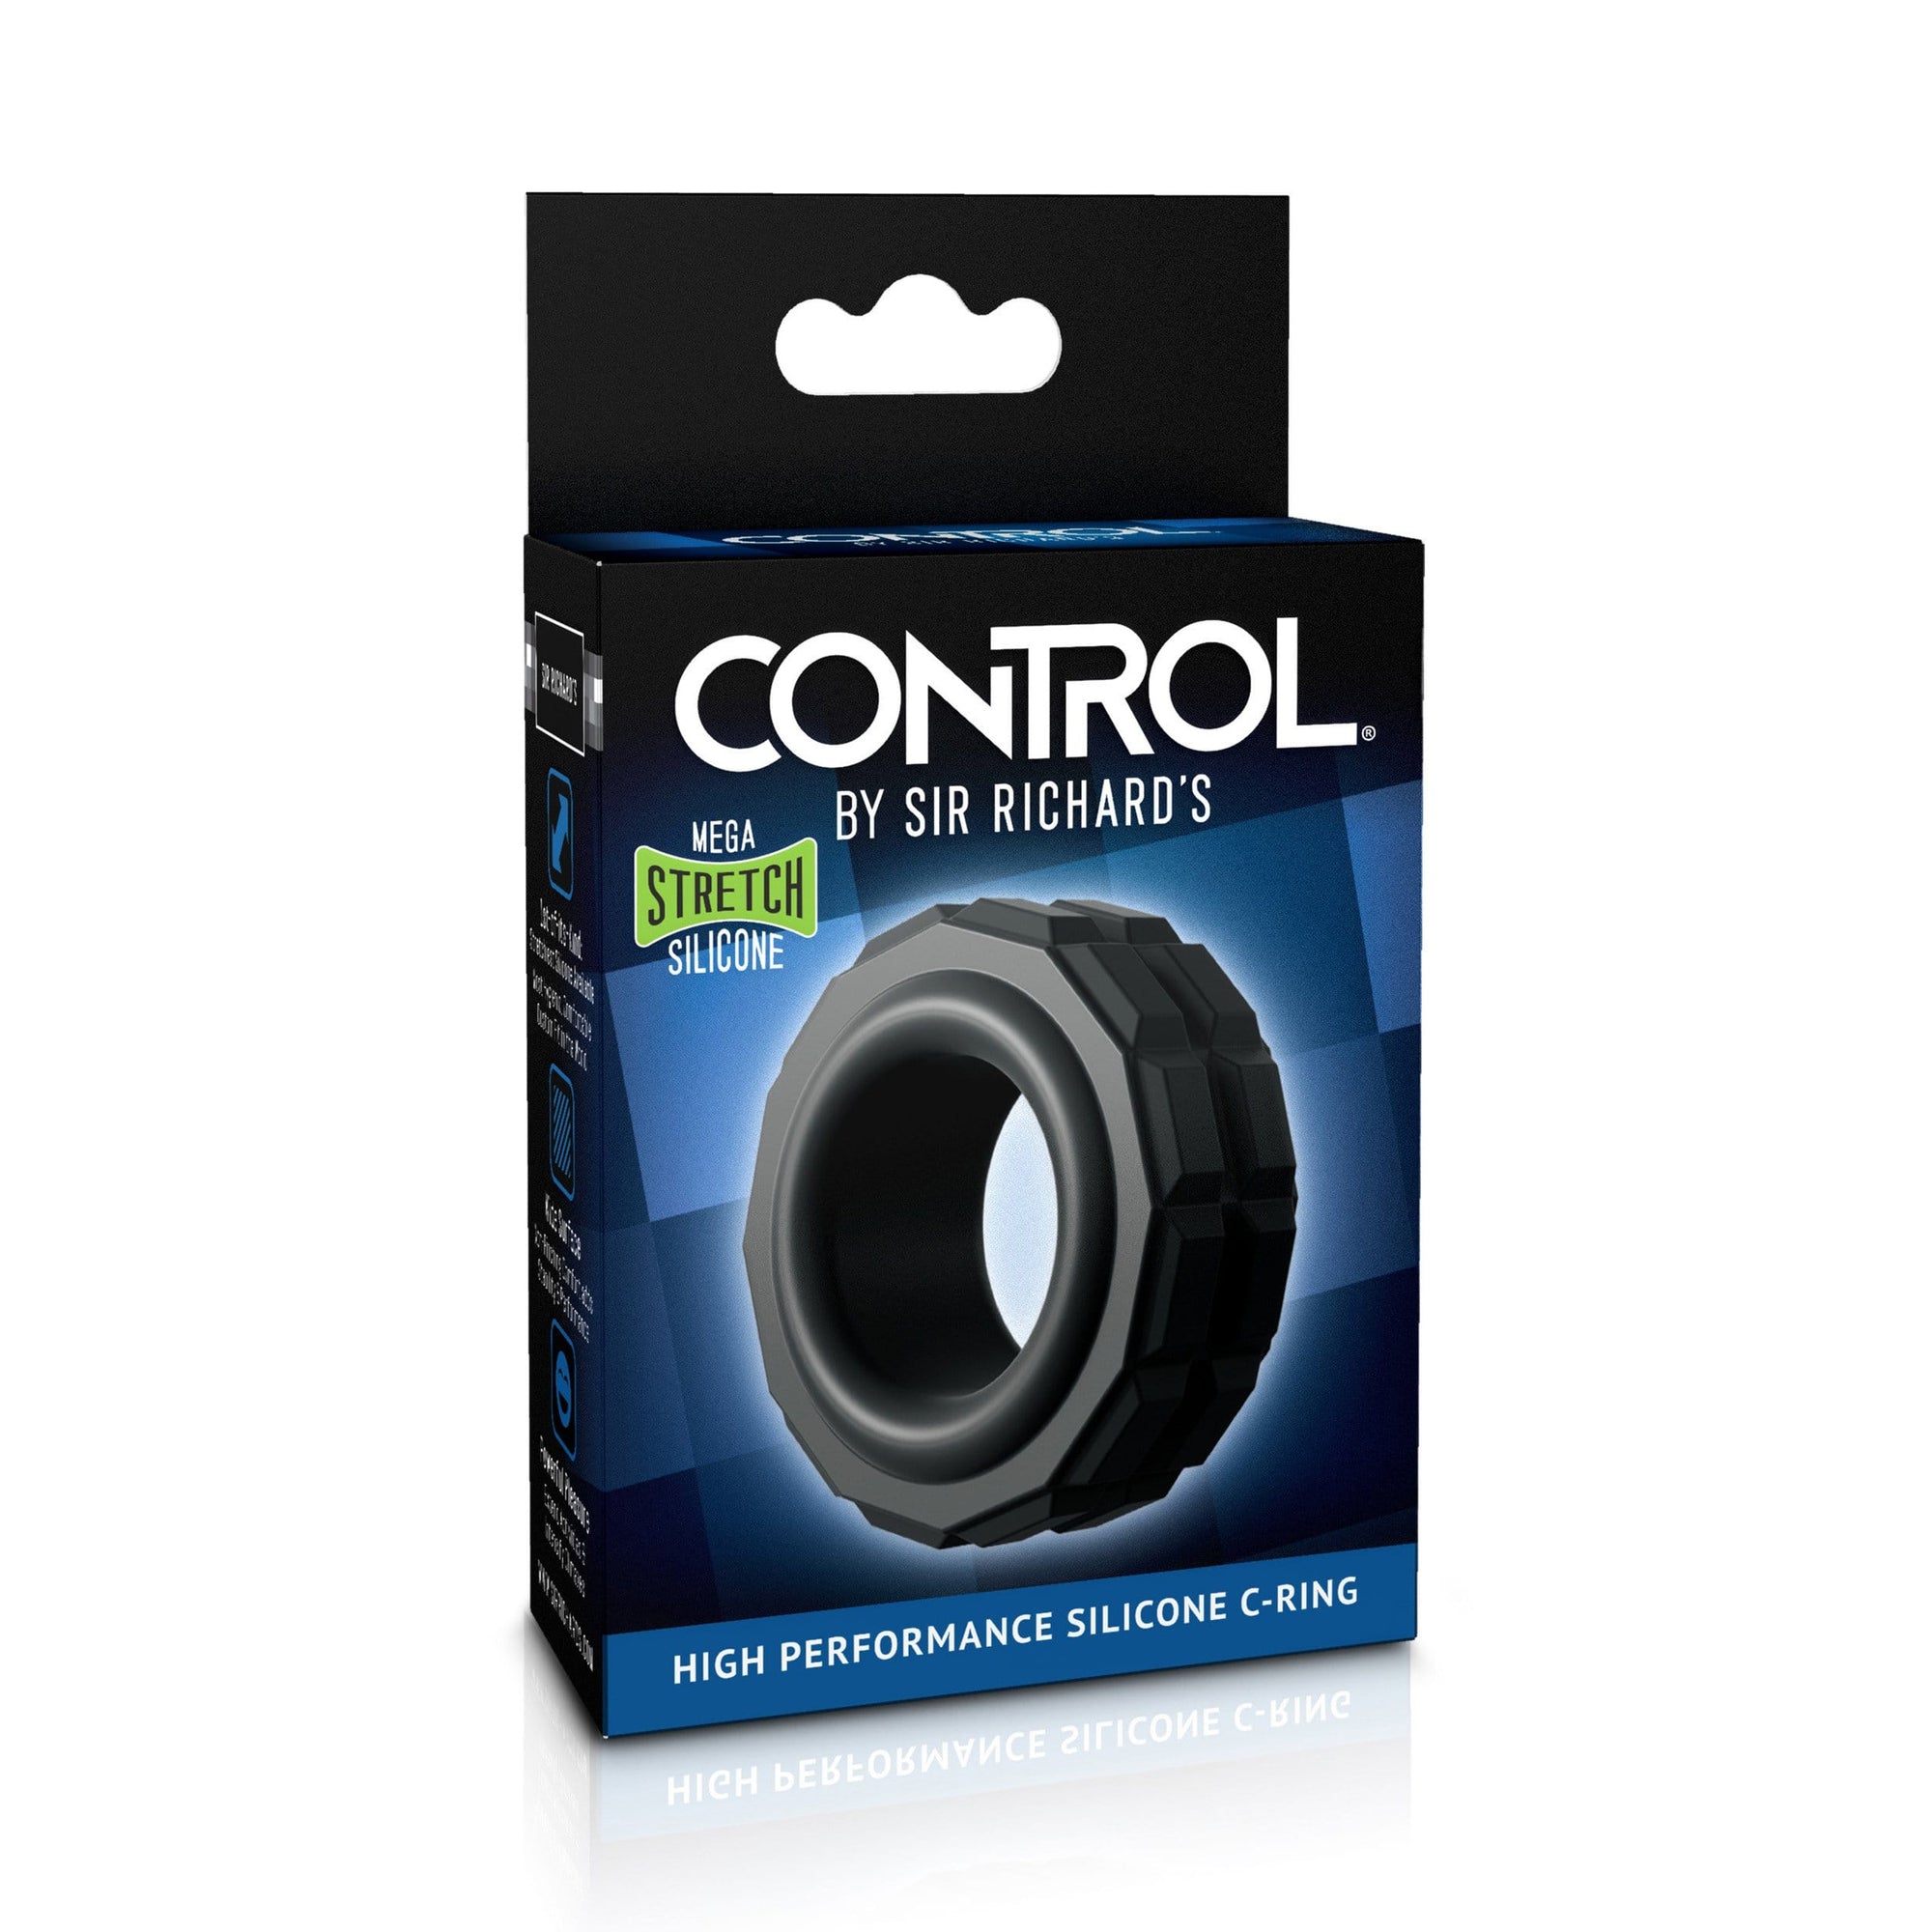 Sir Richards - Control High Performance Silicone C-Ring (Black) Silicone Cock Ring (Non Vibration) 320600499 CherryAffairs